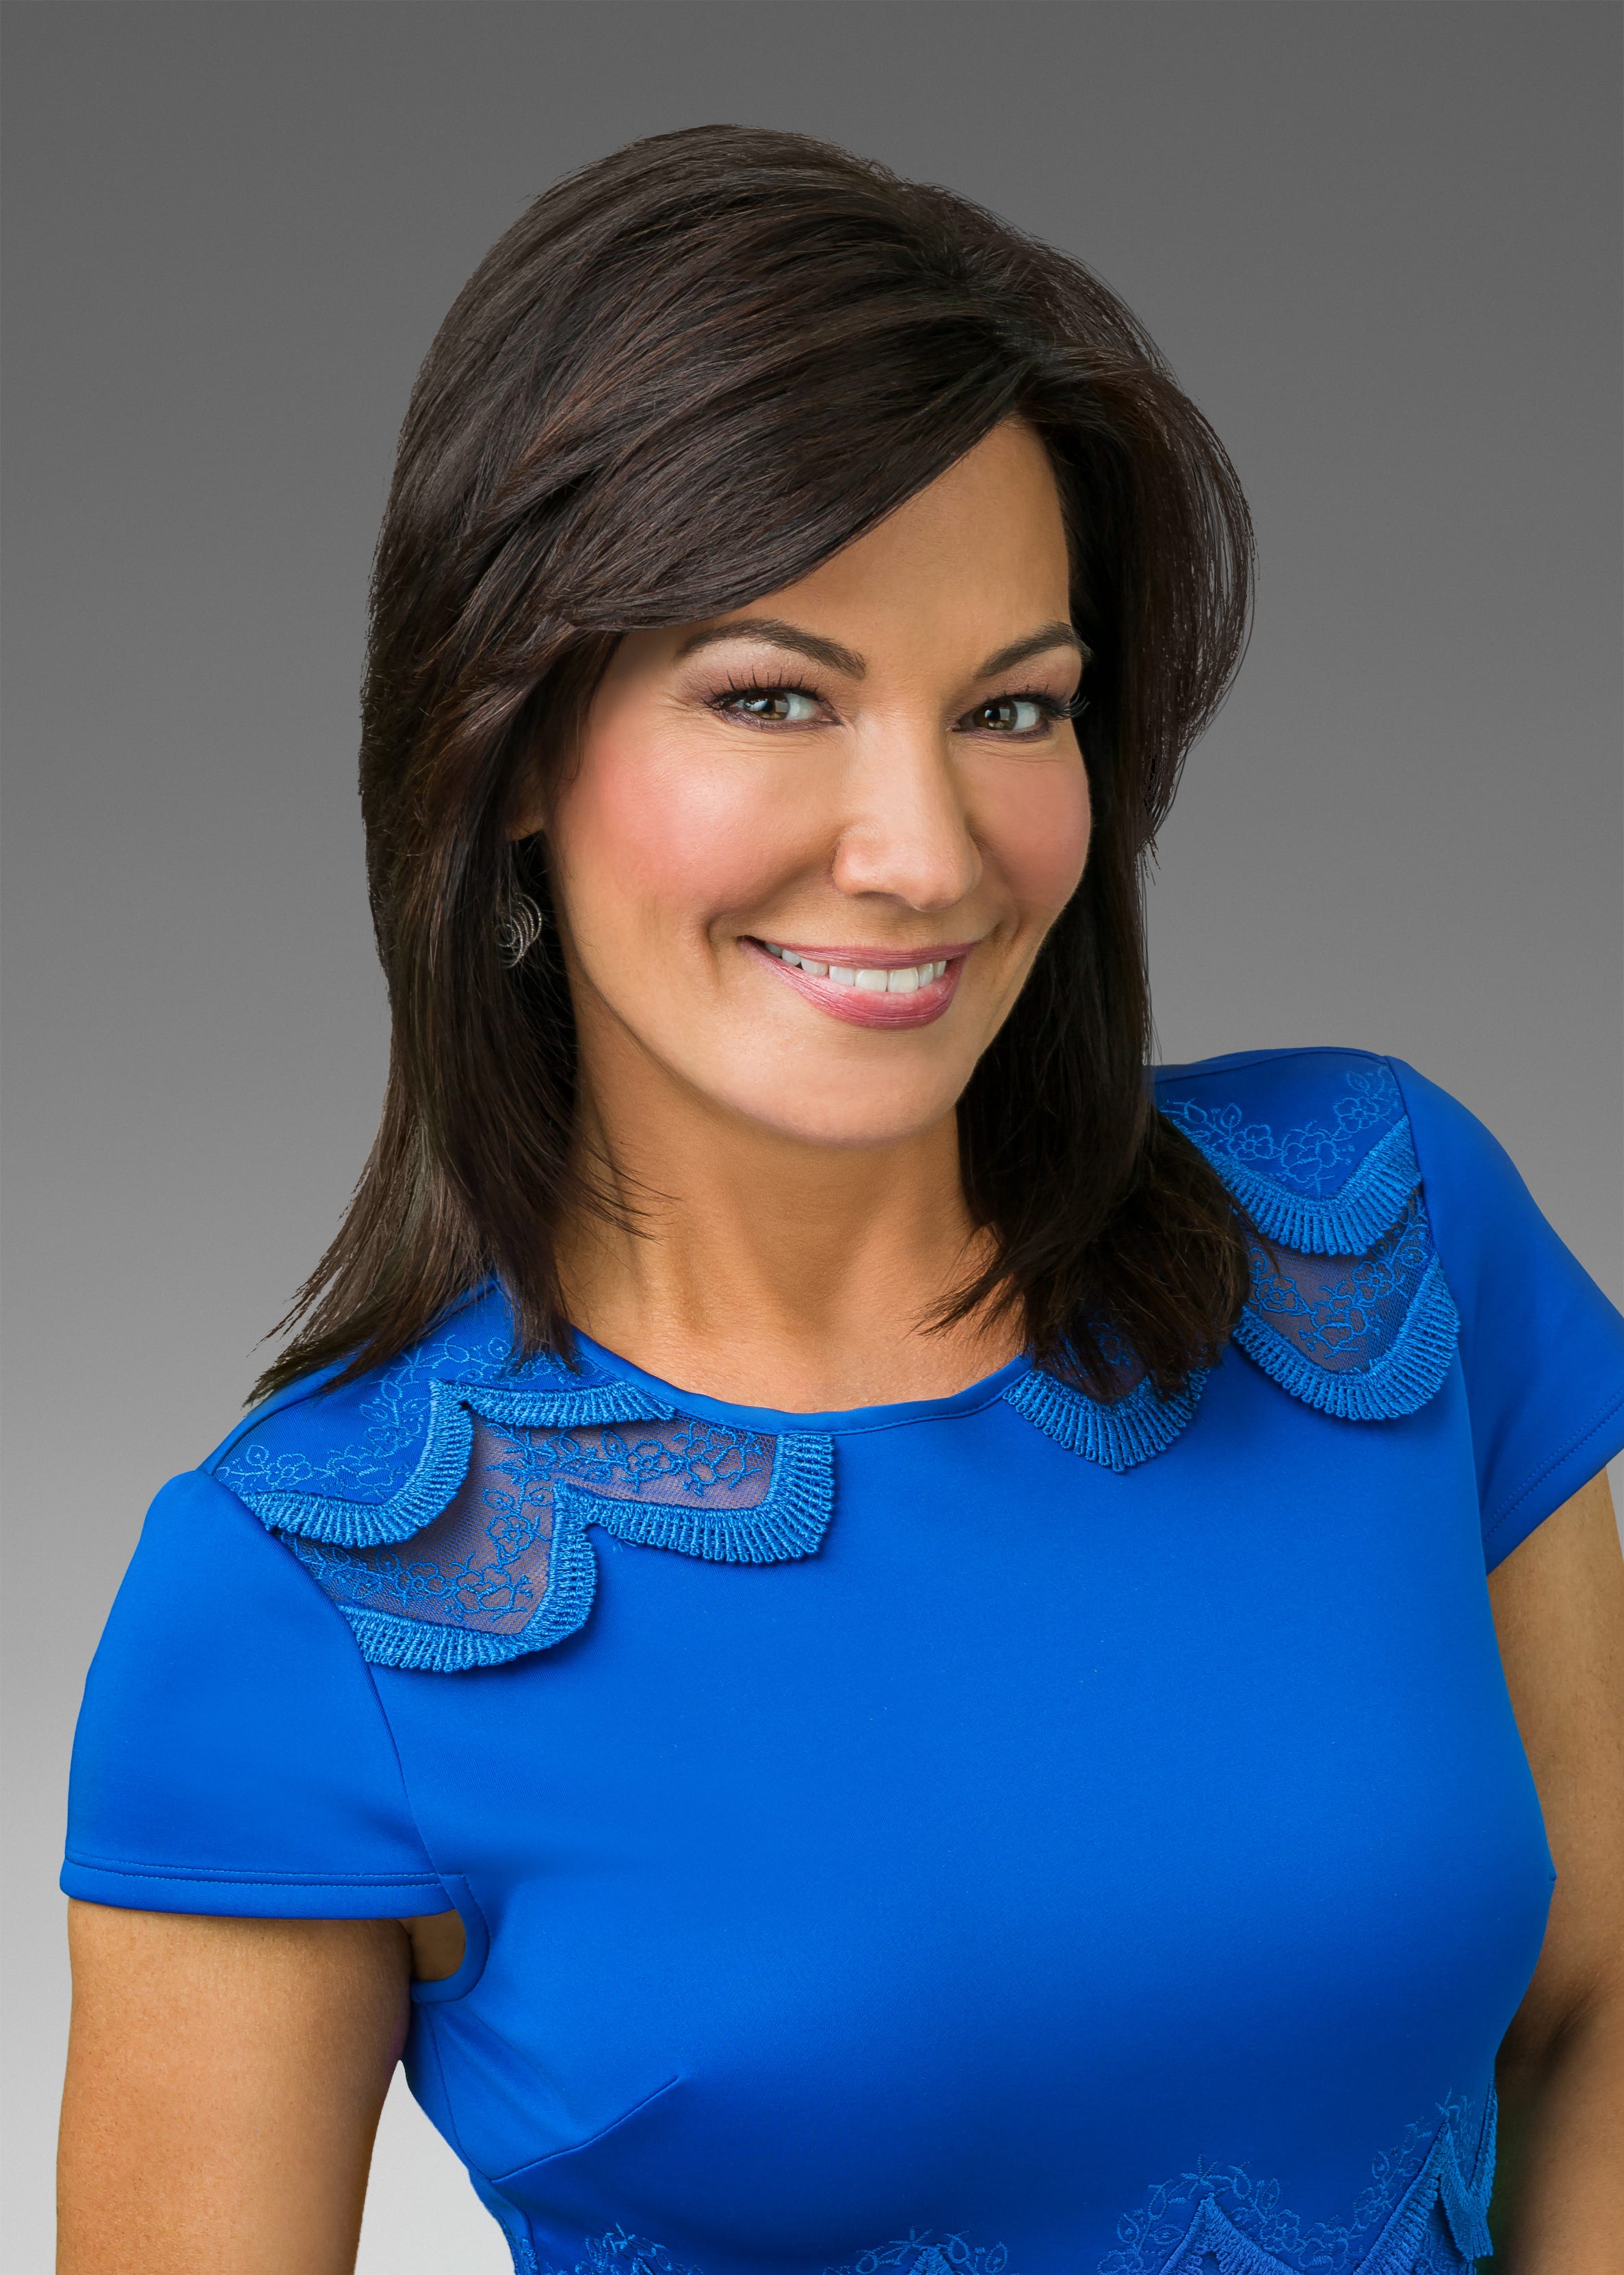 channel 8 news entertainment anchor fired